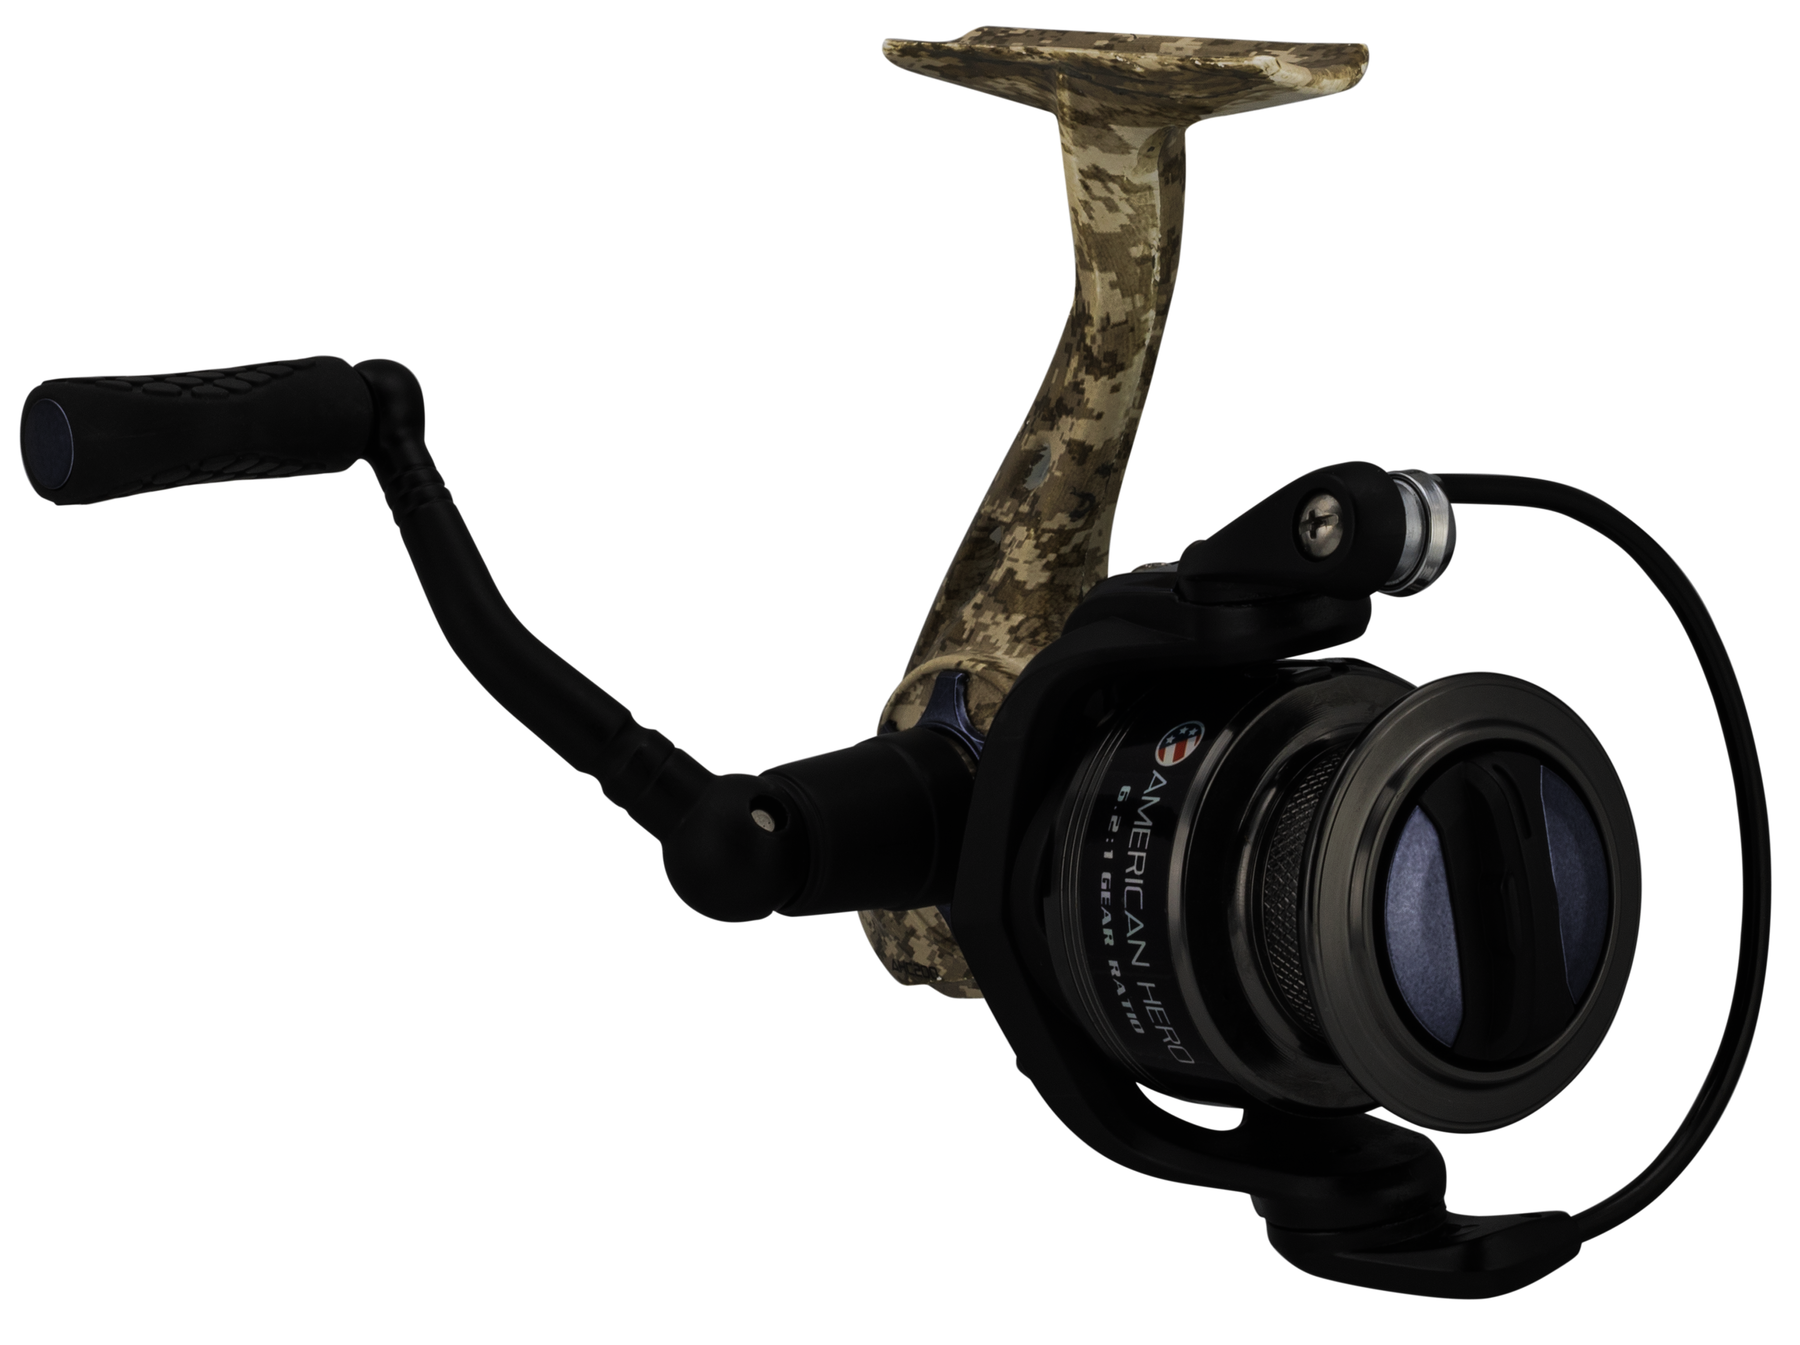  Lew's American Hero Camo 200 Spinning Reel and